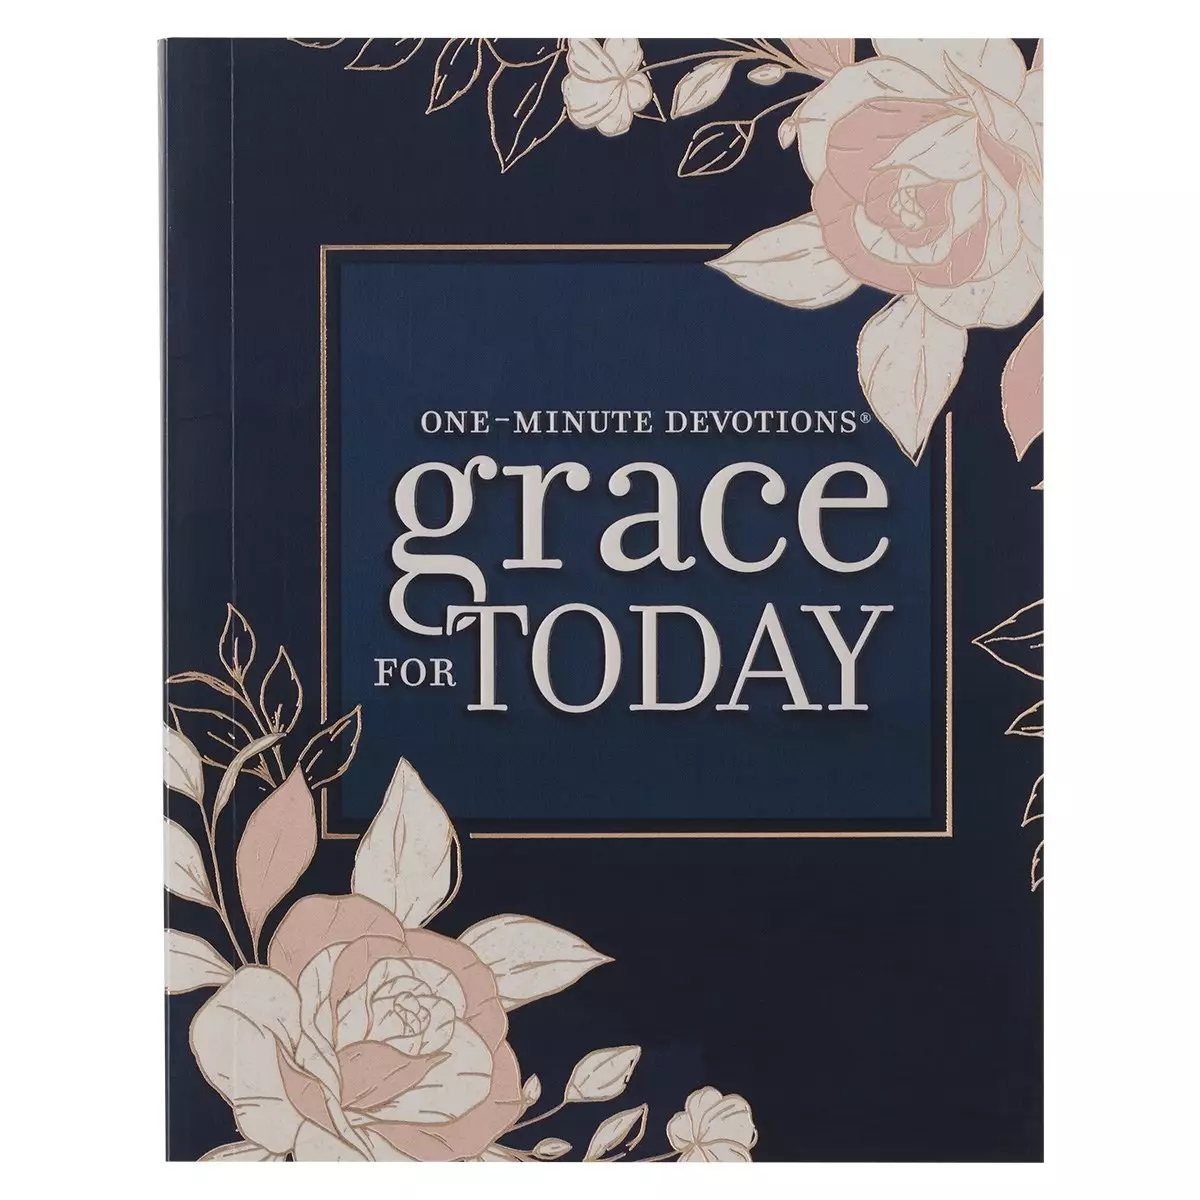 One-Minute Devotions Grace for Today Softcover